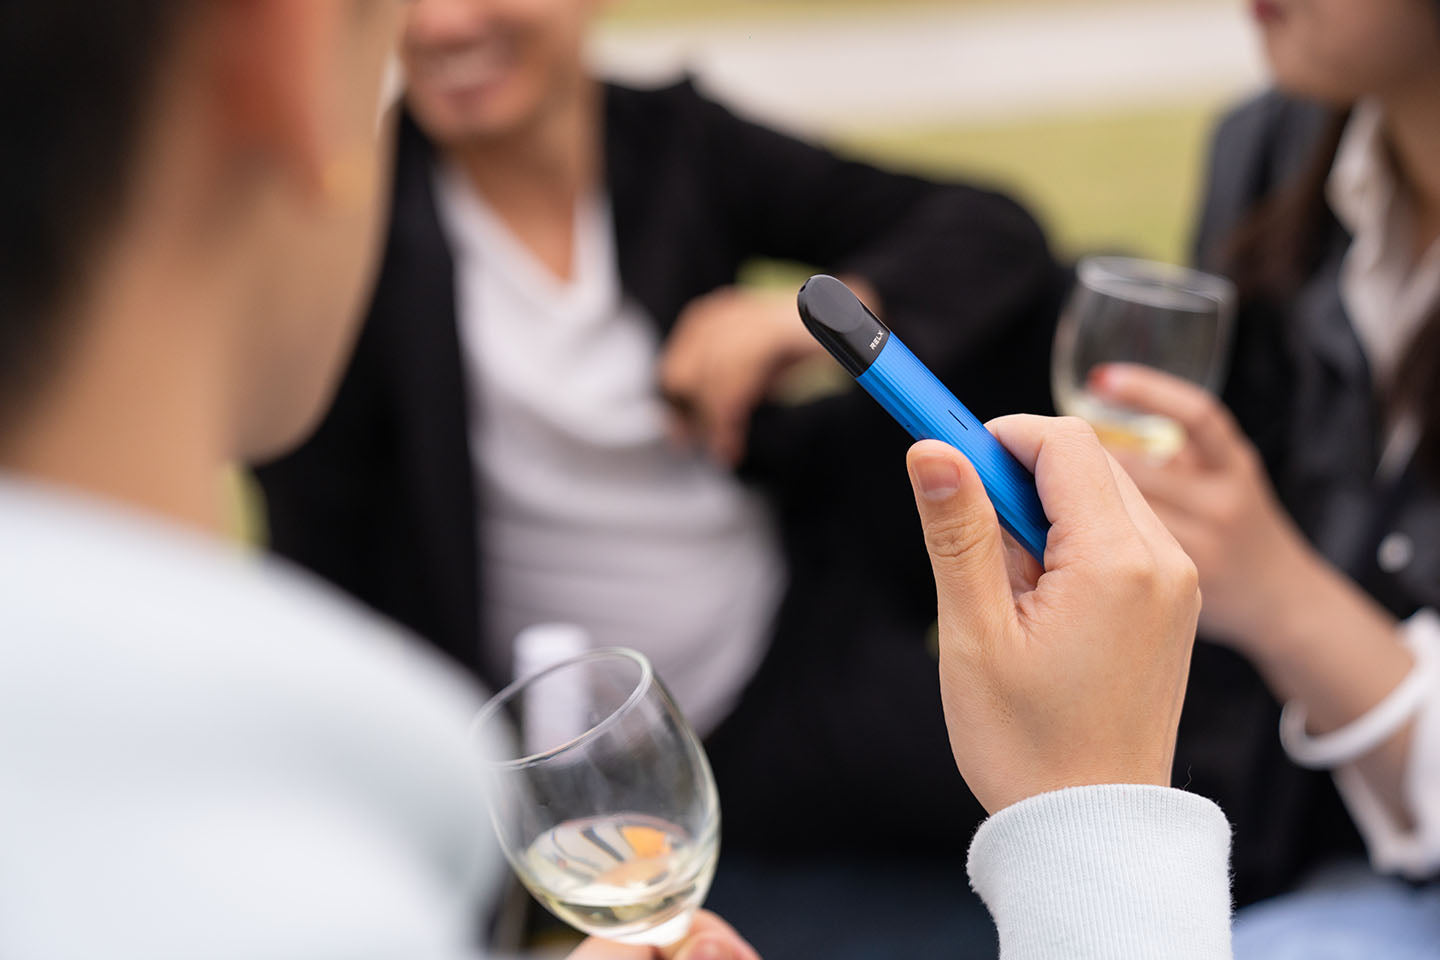 Three out of focus people sit drinking wine, while a hand holding a blue disposable vape is in focus in the foreground of the photo.